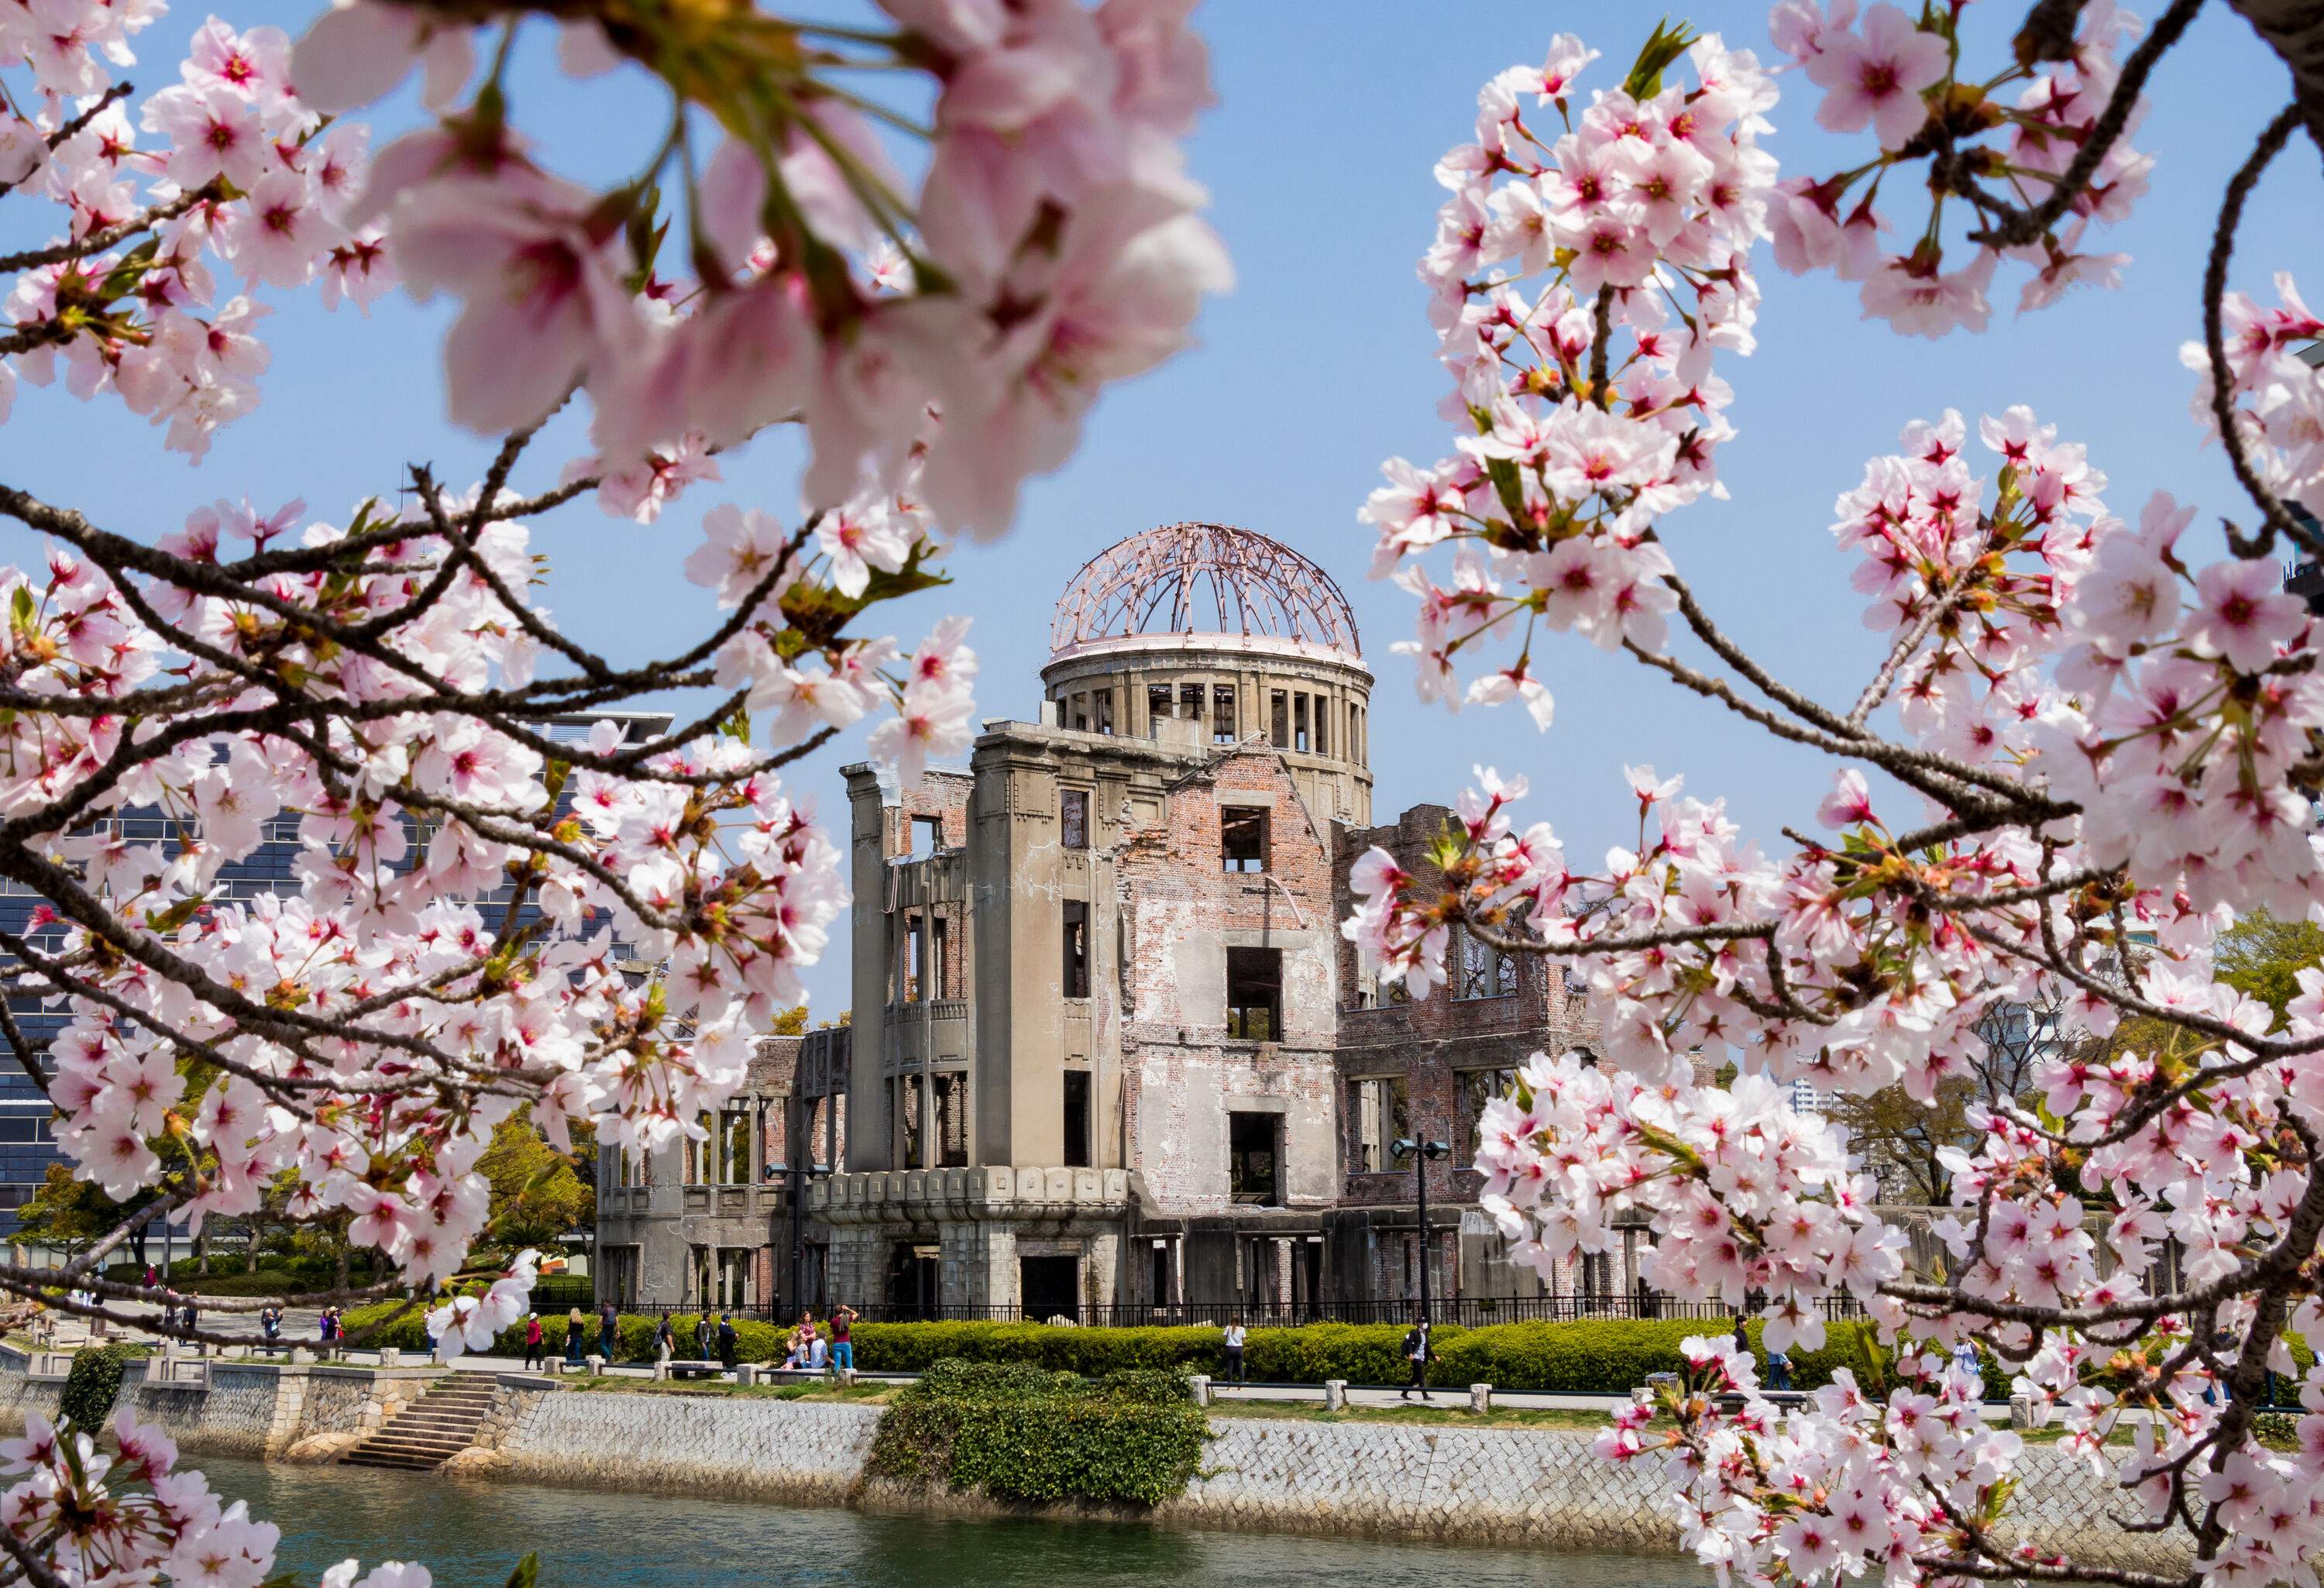 Beautiful cherry blossoms and the remains of the iconic Hiroshima Atomic Bomb Dome in Japan.